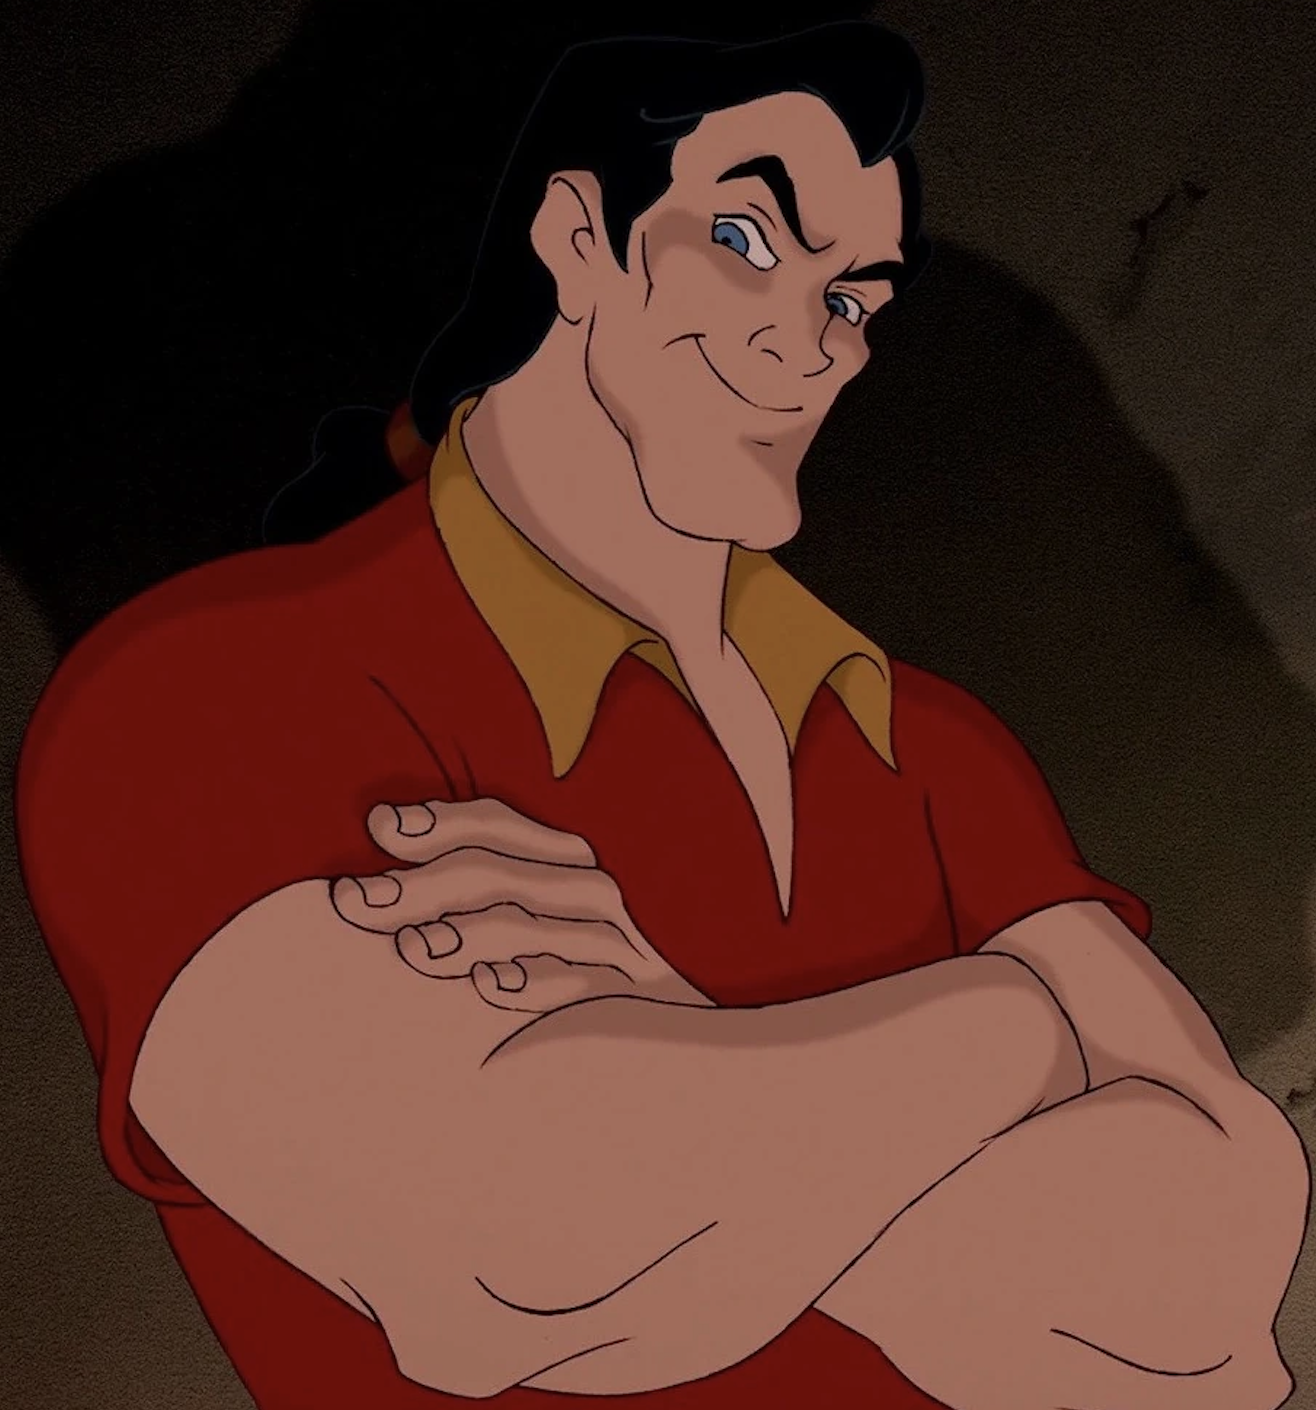 Gaston in his iconic red shirt with muscles